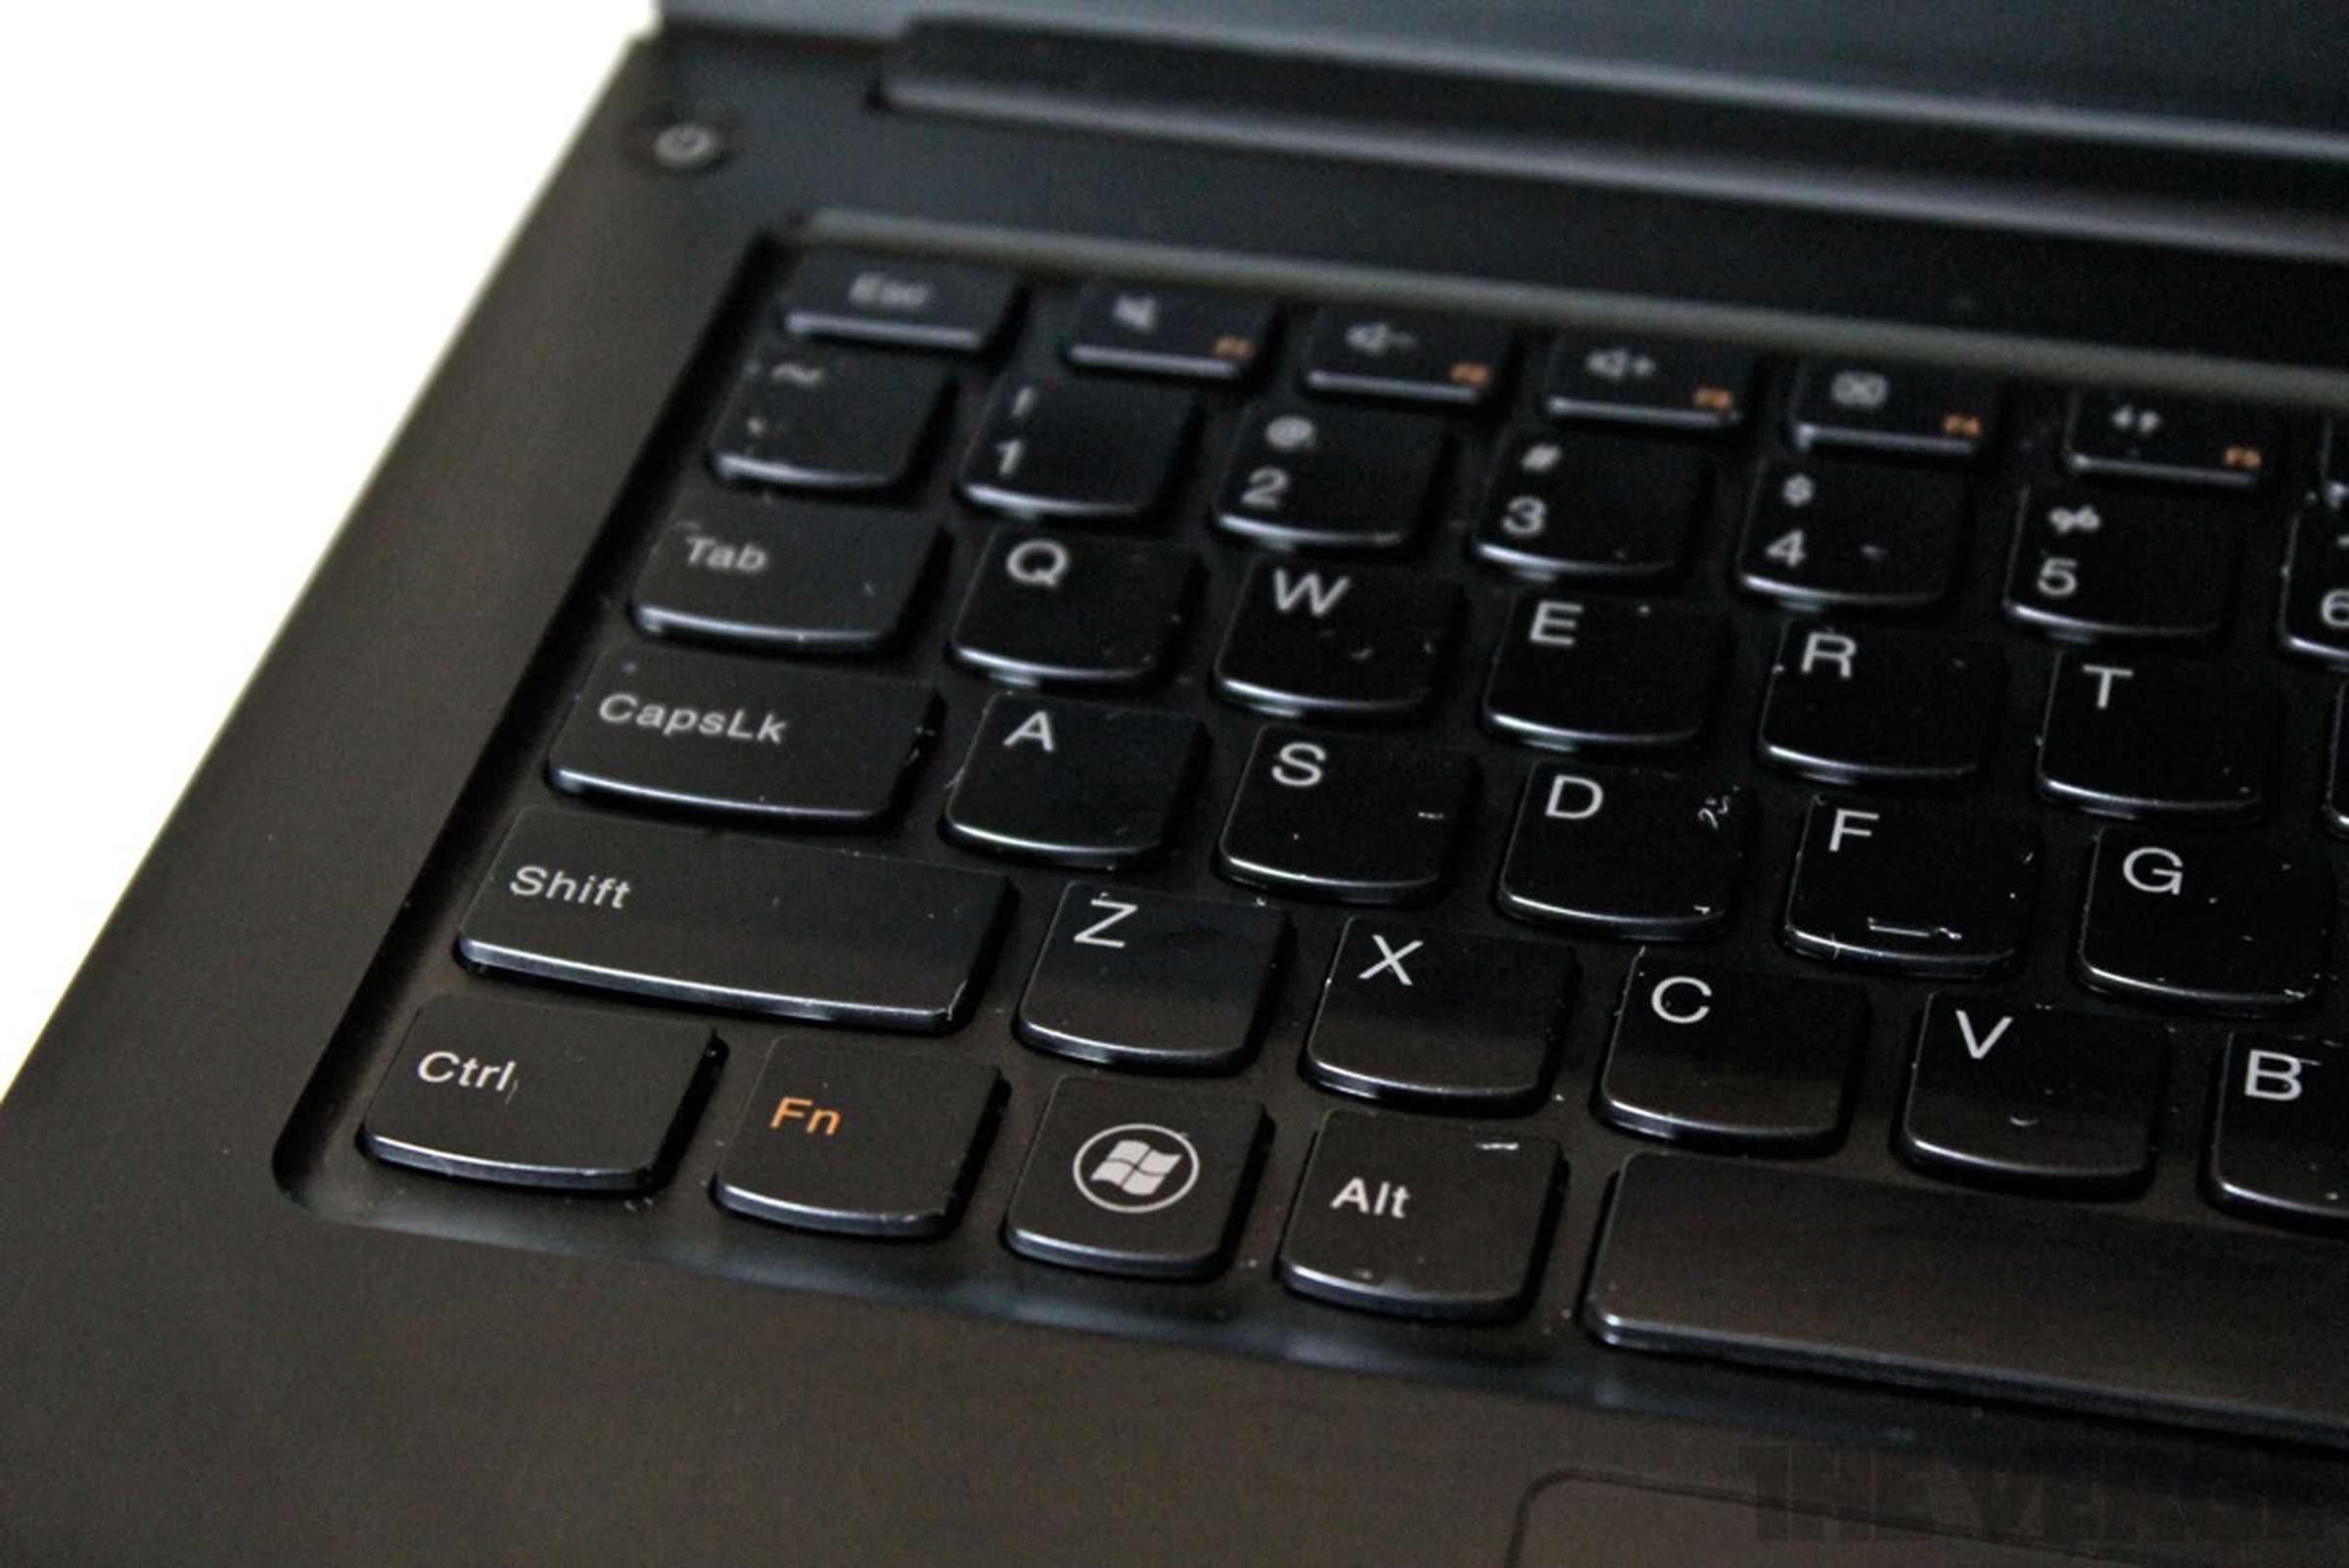 Lenovo IdeaPad U300s ultrabook review pictures 